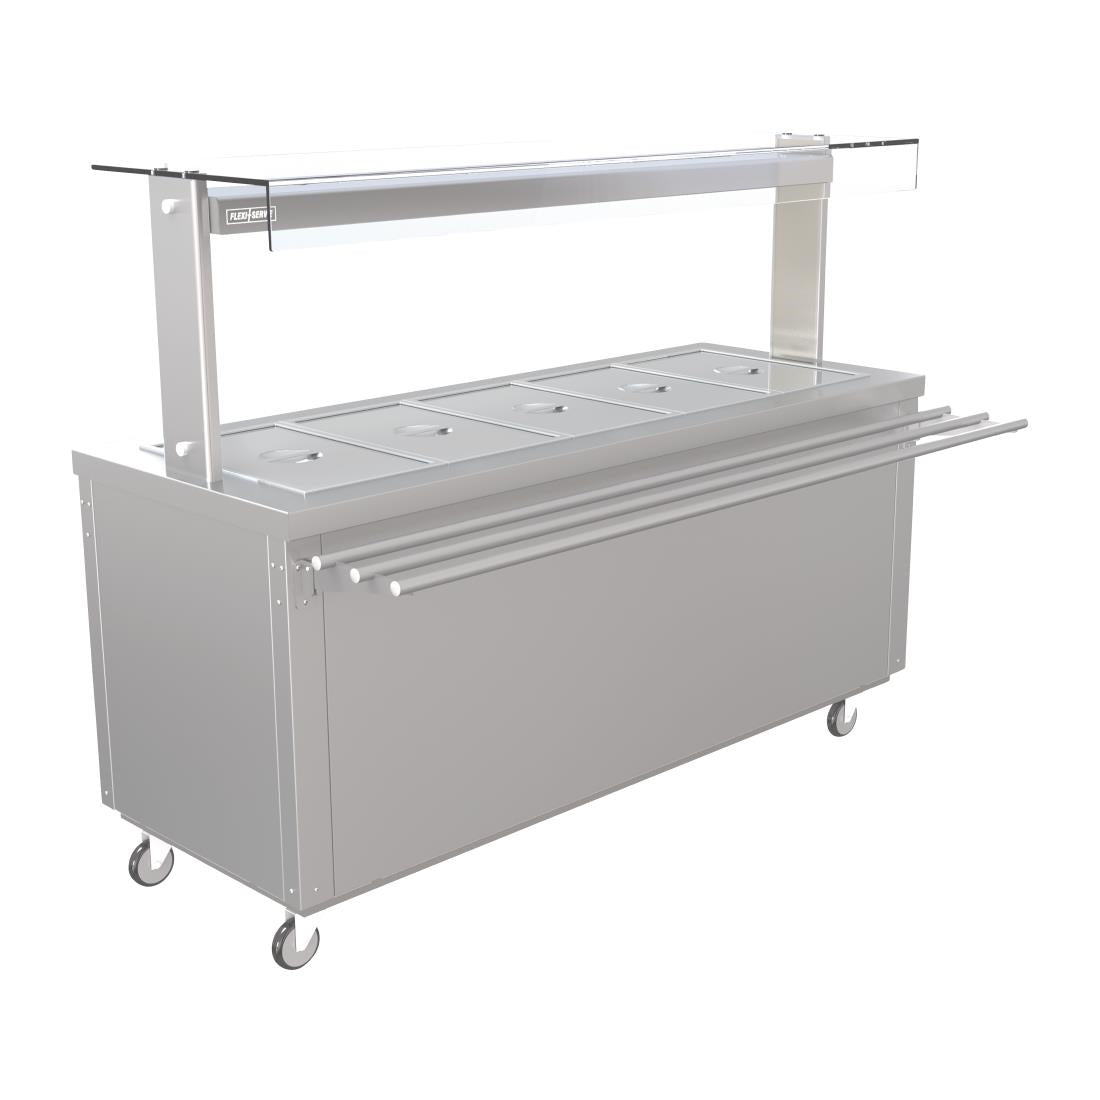 Parry Hot Cupboard with Heated Bain Marie 1830mm FS-HB5PACK - FD227 Hot Cupboards Parry   